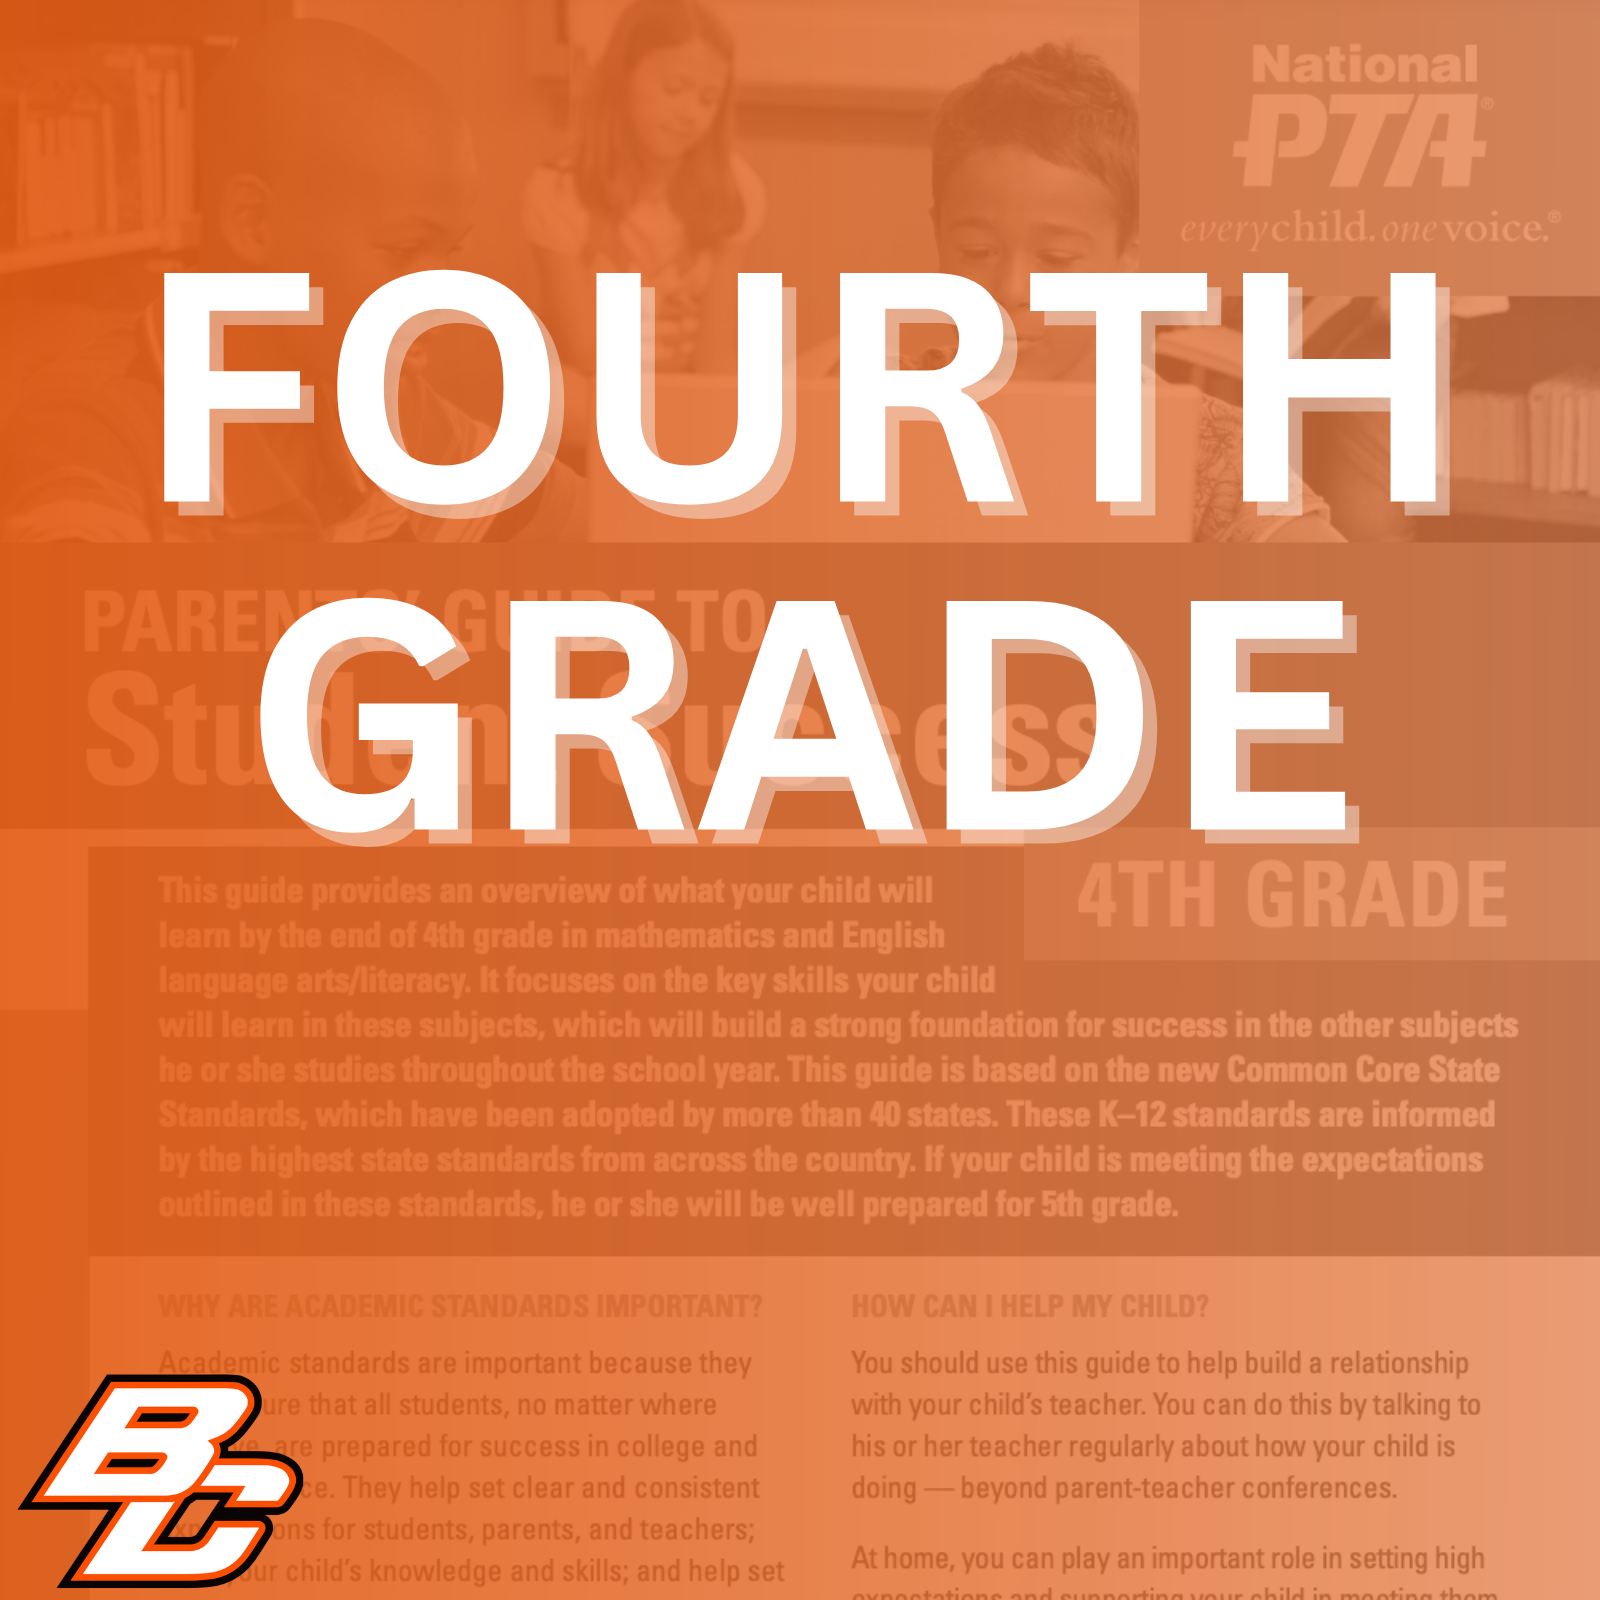 Parent’s Guide to Student Success for 4th grade: This guide provides an overview of what your child will learn by the end of 4th grade in mathematics and English language arts/literacy. It focuses on the key skills your child will learn in these subjects, which will build a strong foundation for success in the other subjects he or she studies throughout the school year. This guide is based on the new Common Core State Standards, which have been adopted by more than 40 states. These K-12 standards are informed by the highest state standards from across the country. If your child is meeting the expectations outlined in these standards, he or she will be well prepared for 5th grade.  Why are academic standards important? Academic standards are important because they help ensure that all students, no matter where they live, are prepared for success in college and the workforce. They help set clear and consistent expectations for students, parents, and teachers; build your child's knowledge and skills; and help set high goals for all students.  Of course, high standards are not the only thing needed for our children's success. But standards provide an important first step - a clear roadmap for learning for teachers, parents, and students. Having clearly defined goals helps families and teachers work together to ensure that students succeed. Standards help parents and teachers know when students need extra assistance or when they need to be challenged even more. They also will help your child develop critical thinking skills that will prepare him or her for college and career.  How can I help my child? You should use this guide to help build a relationship with your child's teacher. You can do this by talking to his or her teacher regularly about how your child is doing - beyond parent-teacher conferences.  At home, you can play an important role in setting high expectations and supporting your child in meeting them. If your child needs a little extra help or wants to learn more about a subject, work with his or her teacher to identify opportunities for tutoring, to get involved in clubs after school, or to find other resources.  This guide includes: An overview of some of the key things your child will learn in English/literacy and math in 4th grade, ideas for activities to help your child learn at home and topics of discussion for talking to your child's teacher about his or her academic progress.